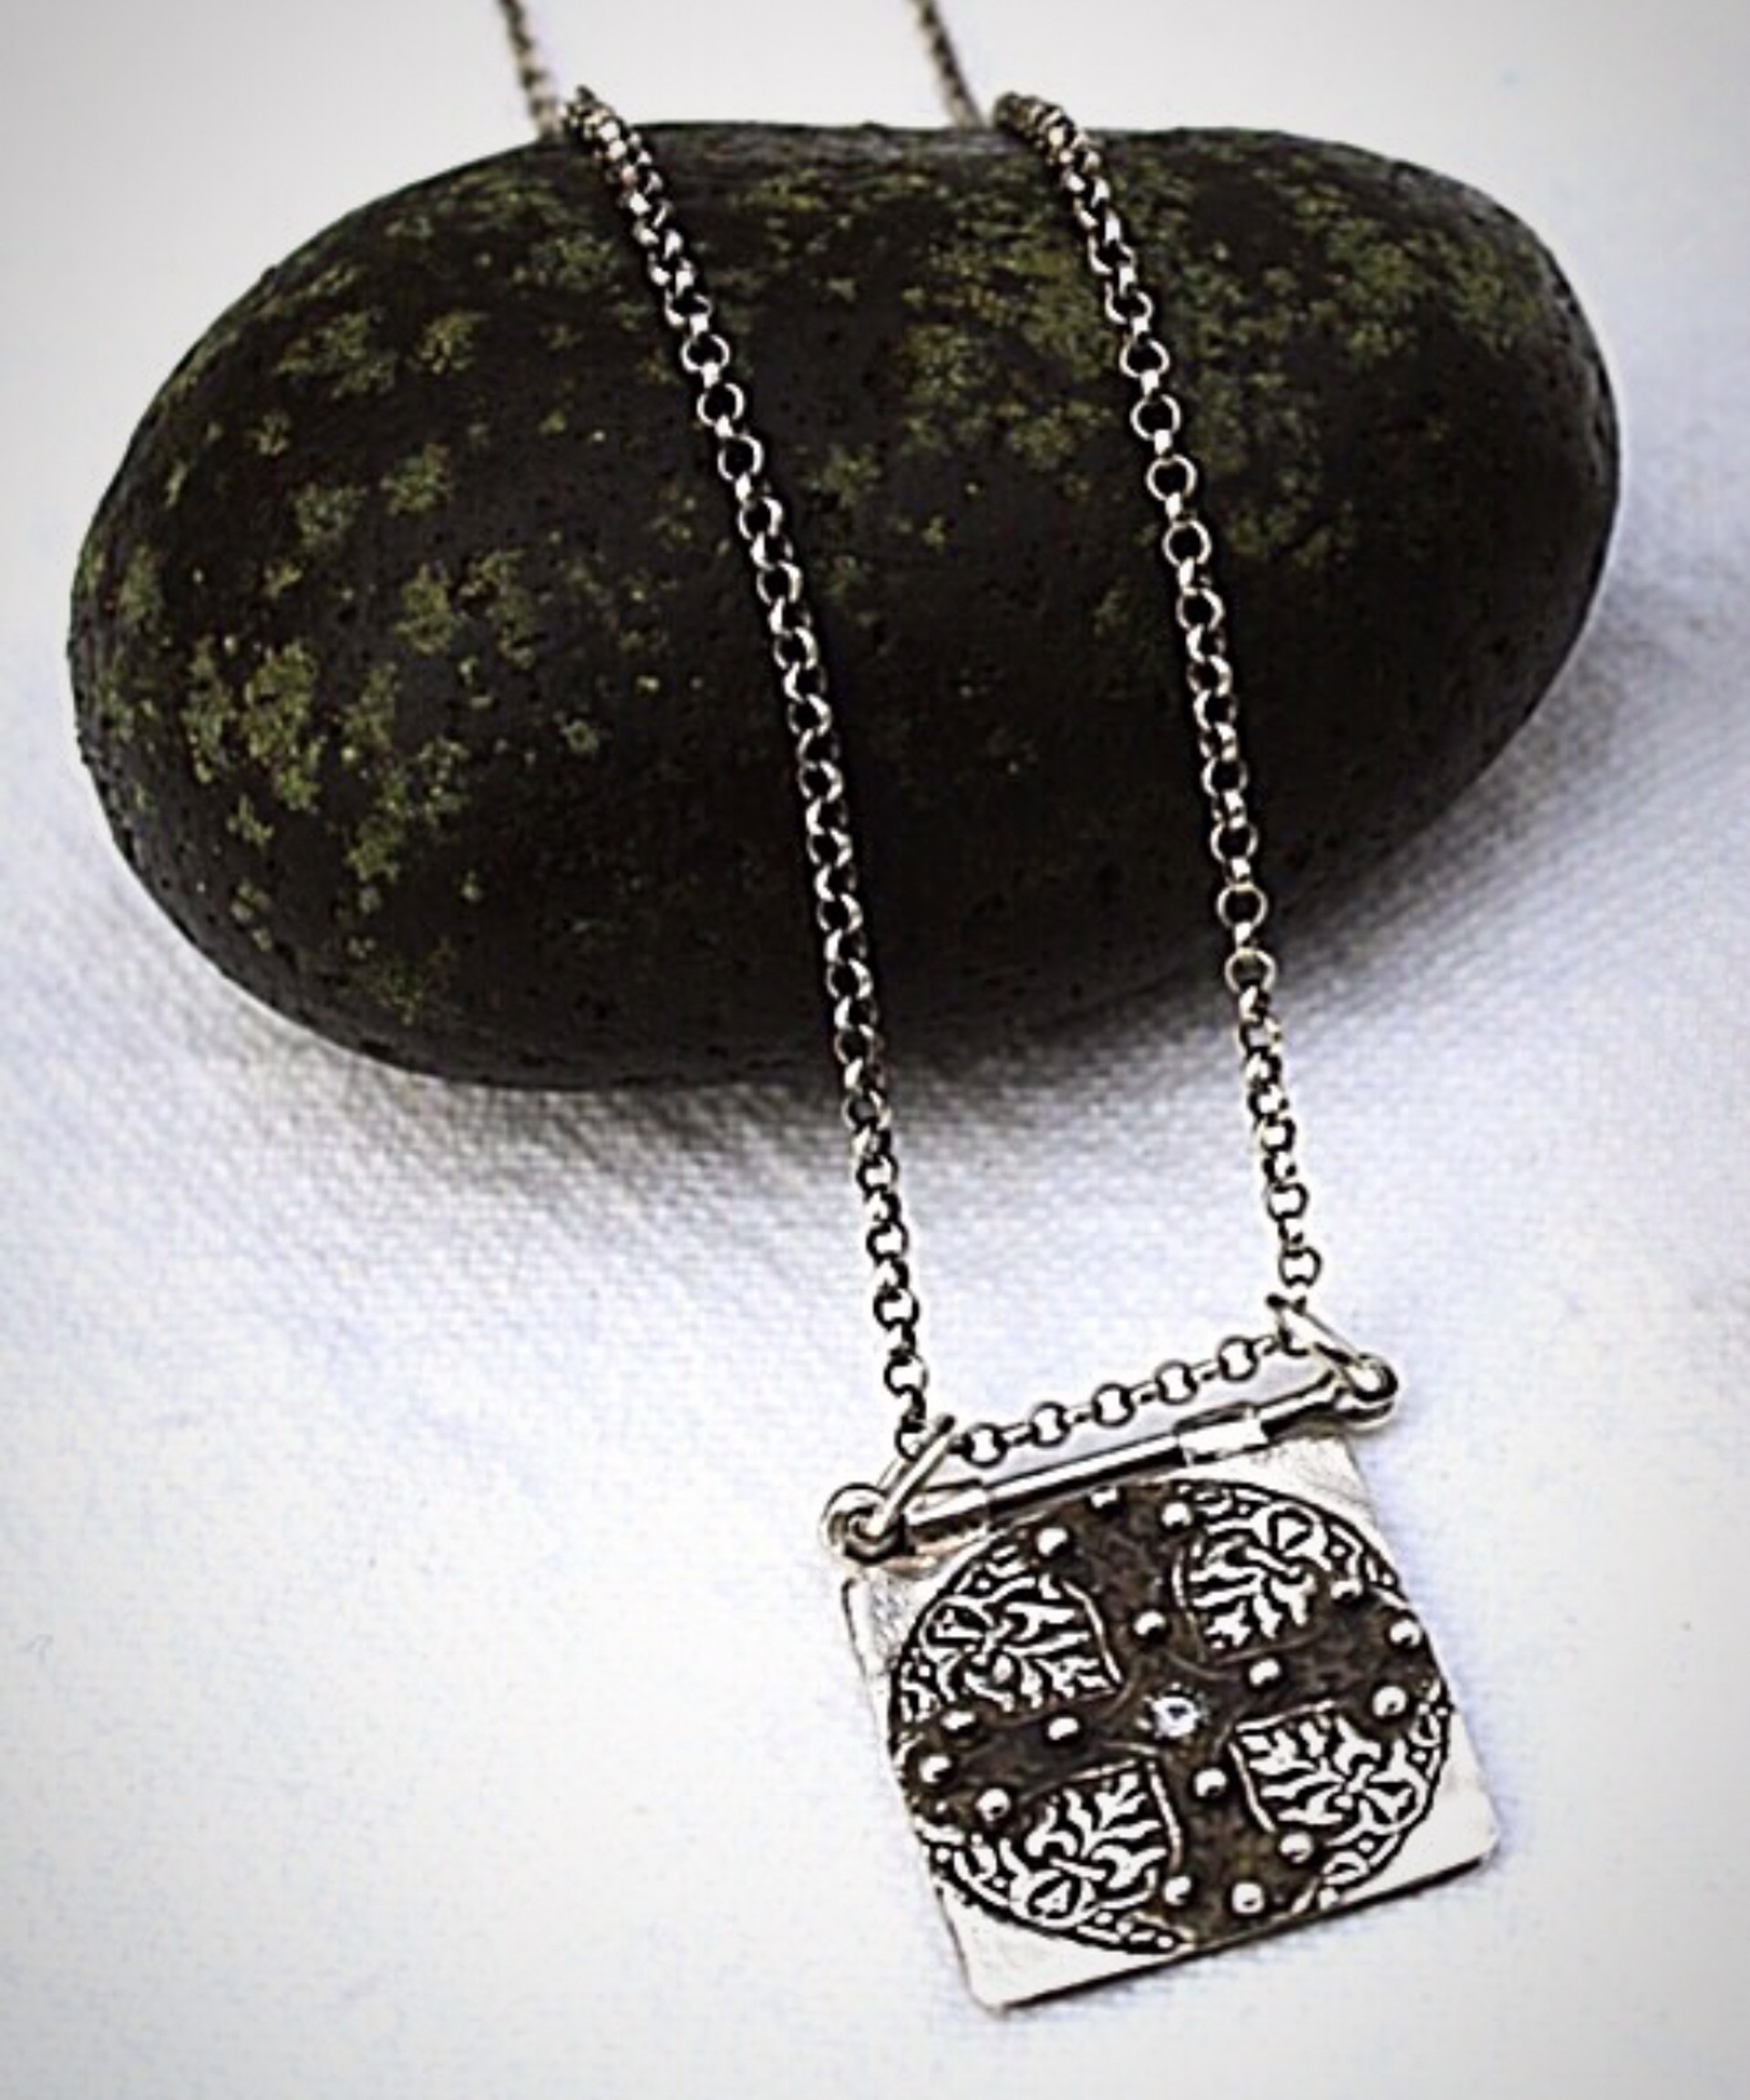 Knight's Cross Necklace by Terry Williams Brau